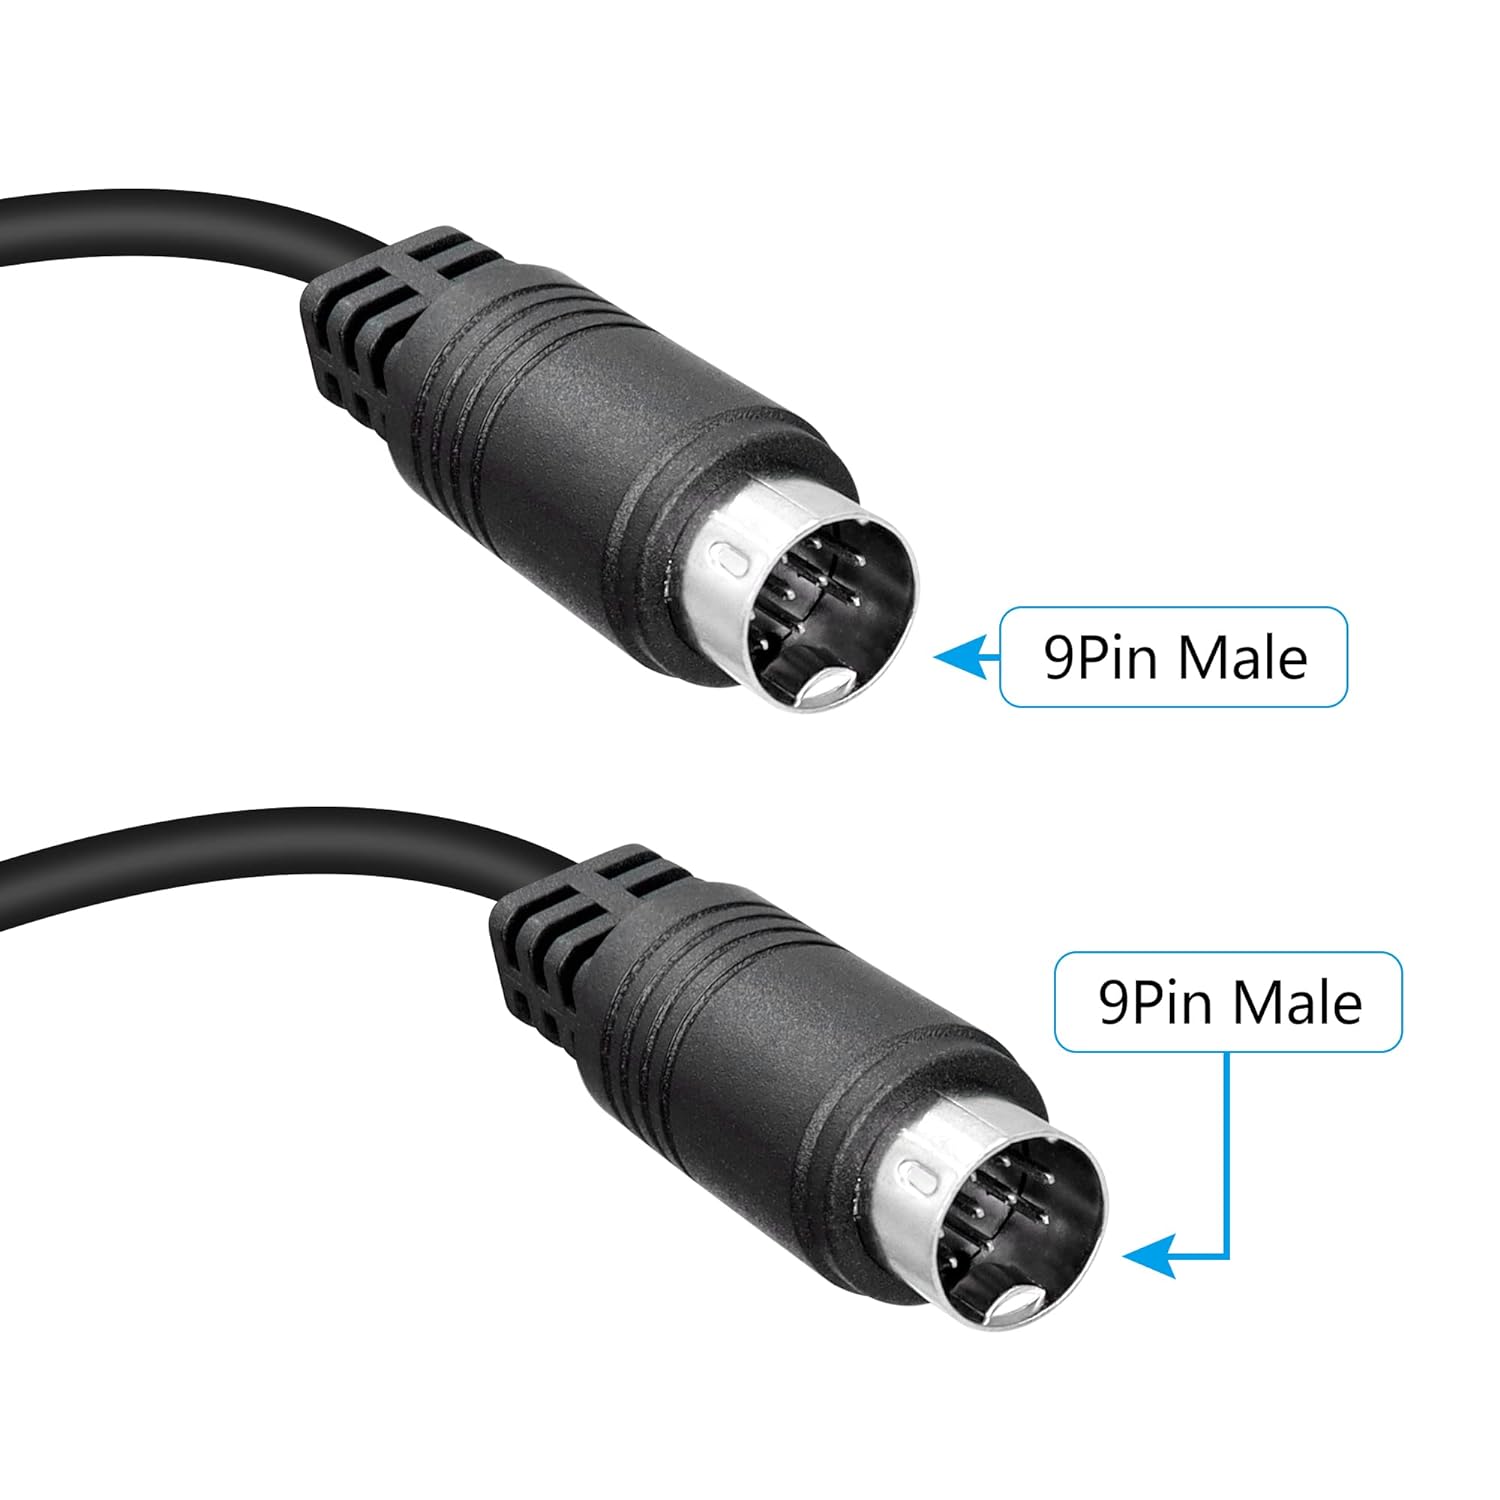 9 Pin Mini Din Male to Male Stereo Audio Cable for Audio equipment